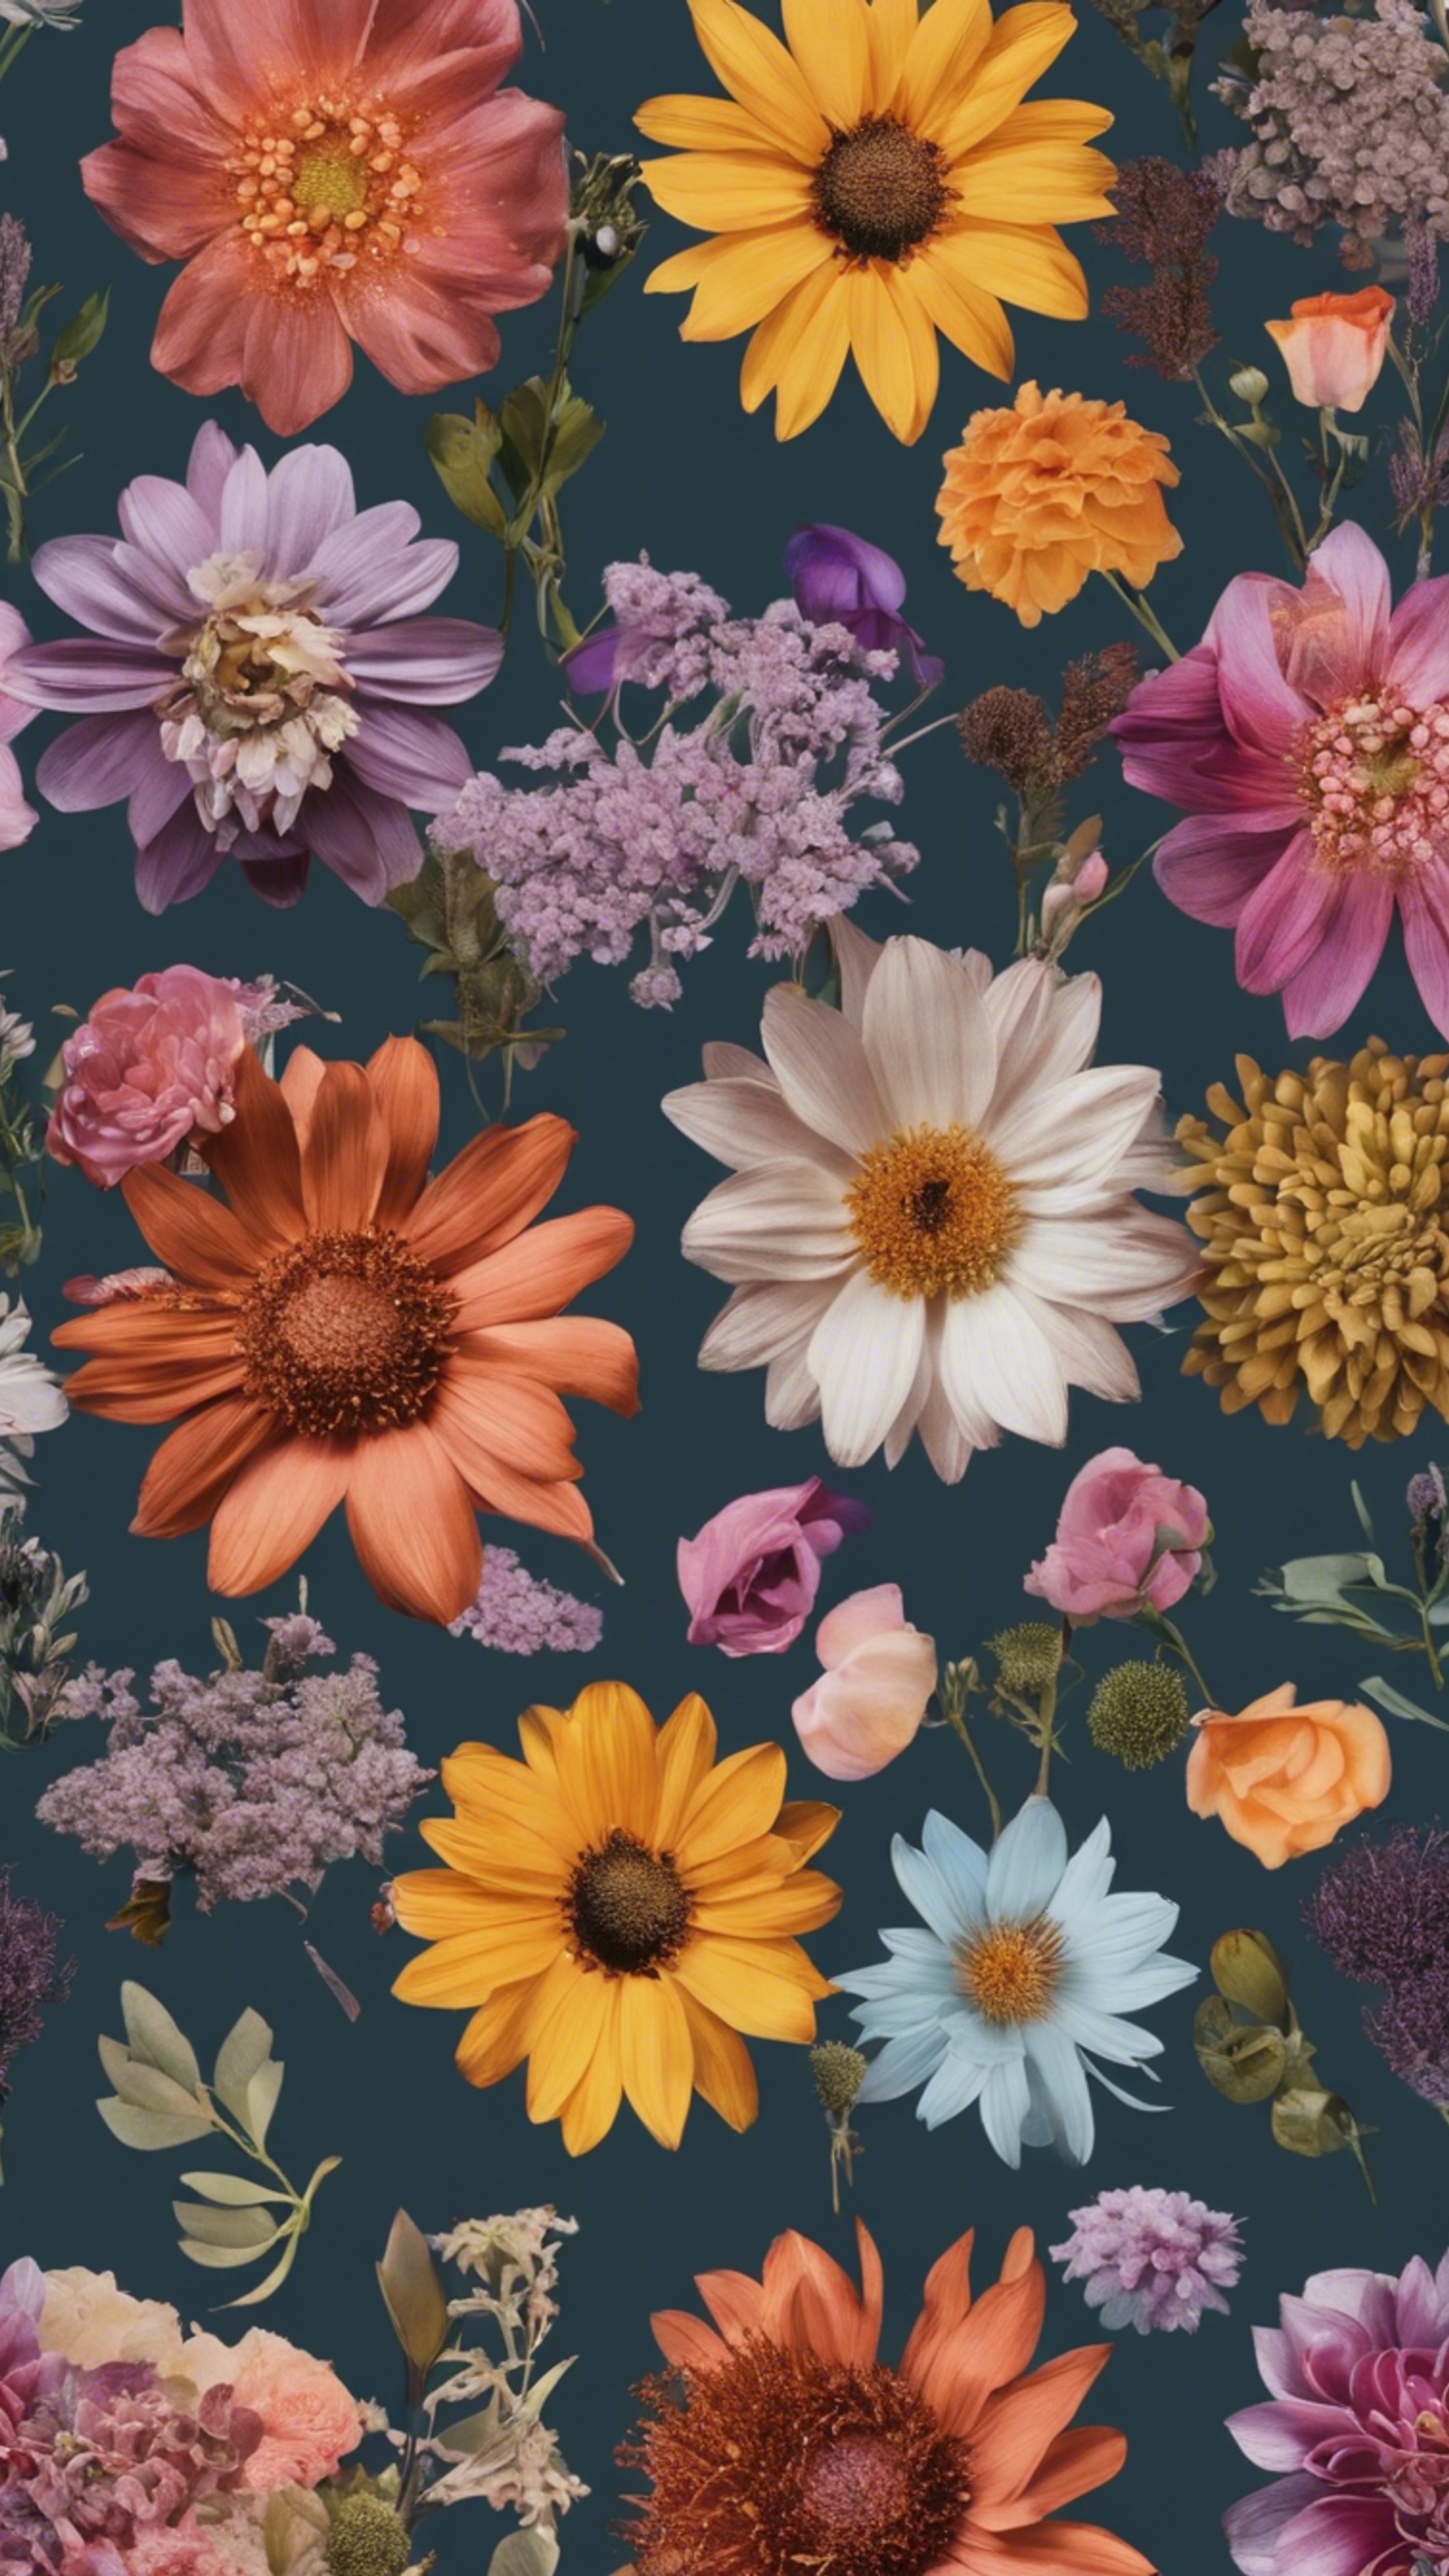 Multiple flowers of different types and colors, distinctively arranged in a bohemian floral design pattern. 벽지[d475d4e8f3a0489d92d5]